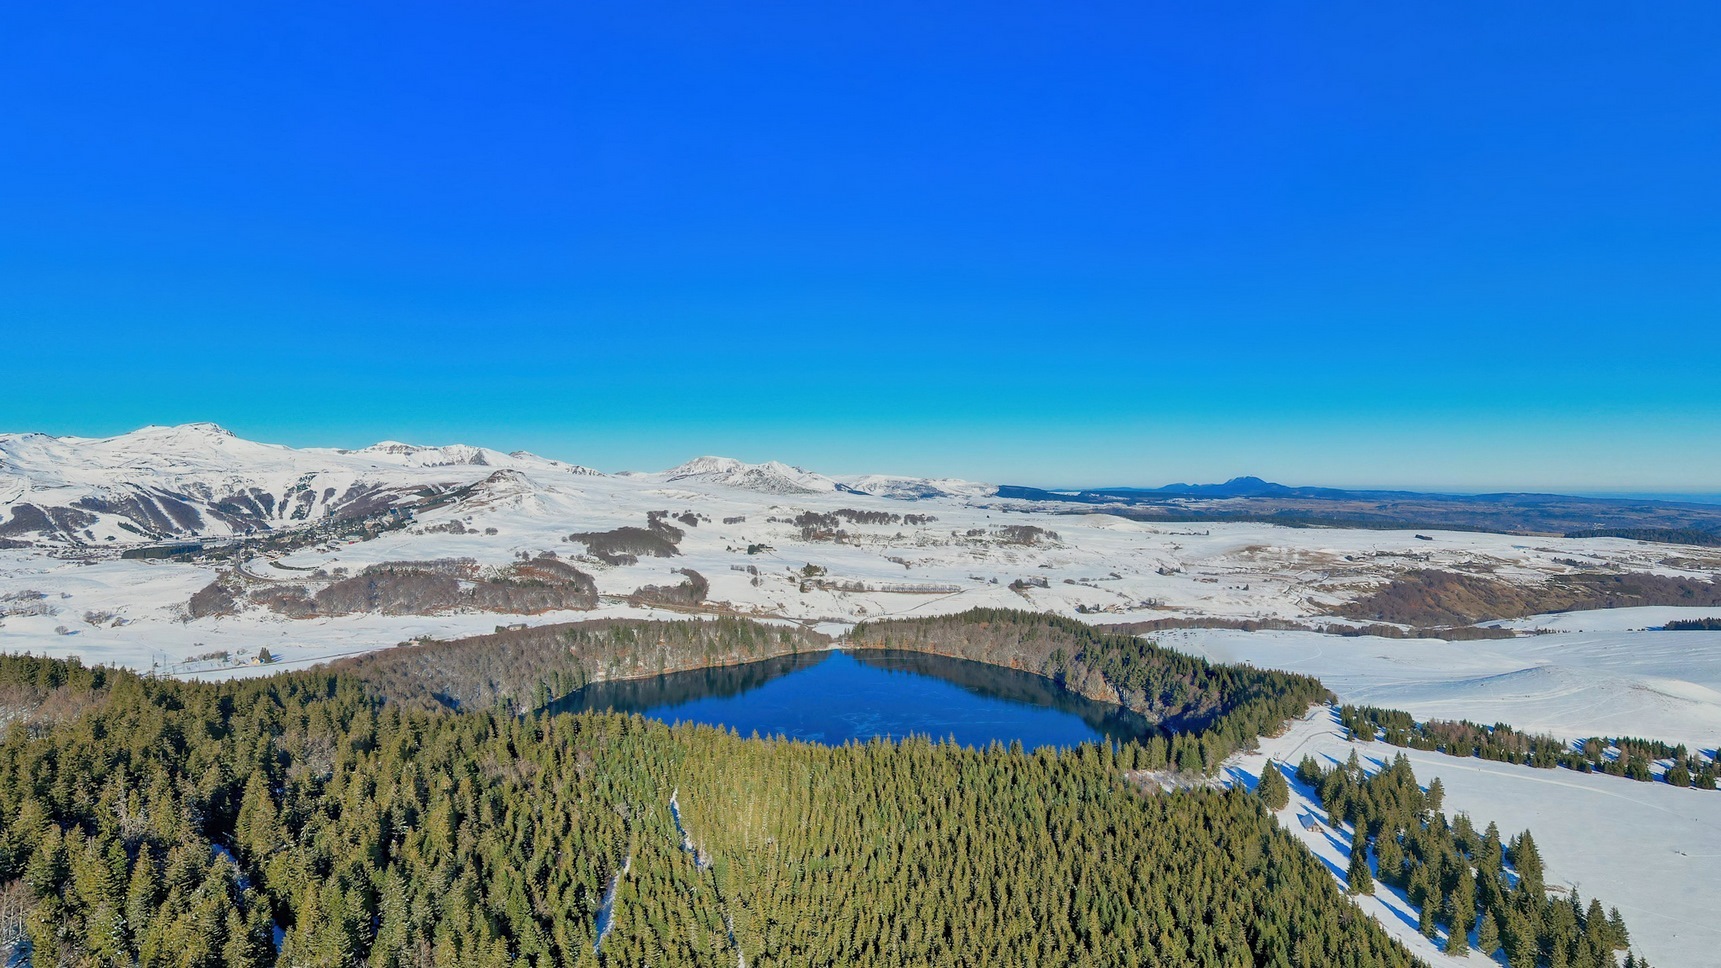 Lac Pavin - Lake seen from the sky